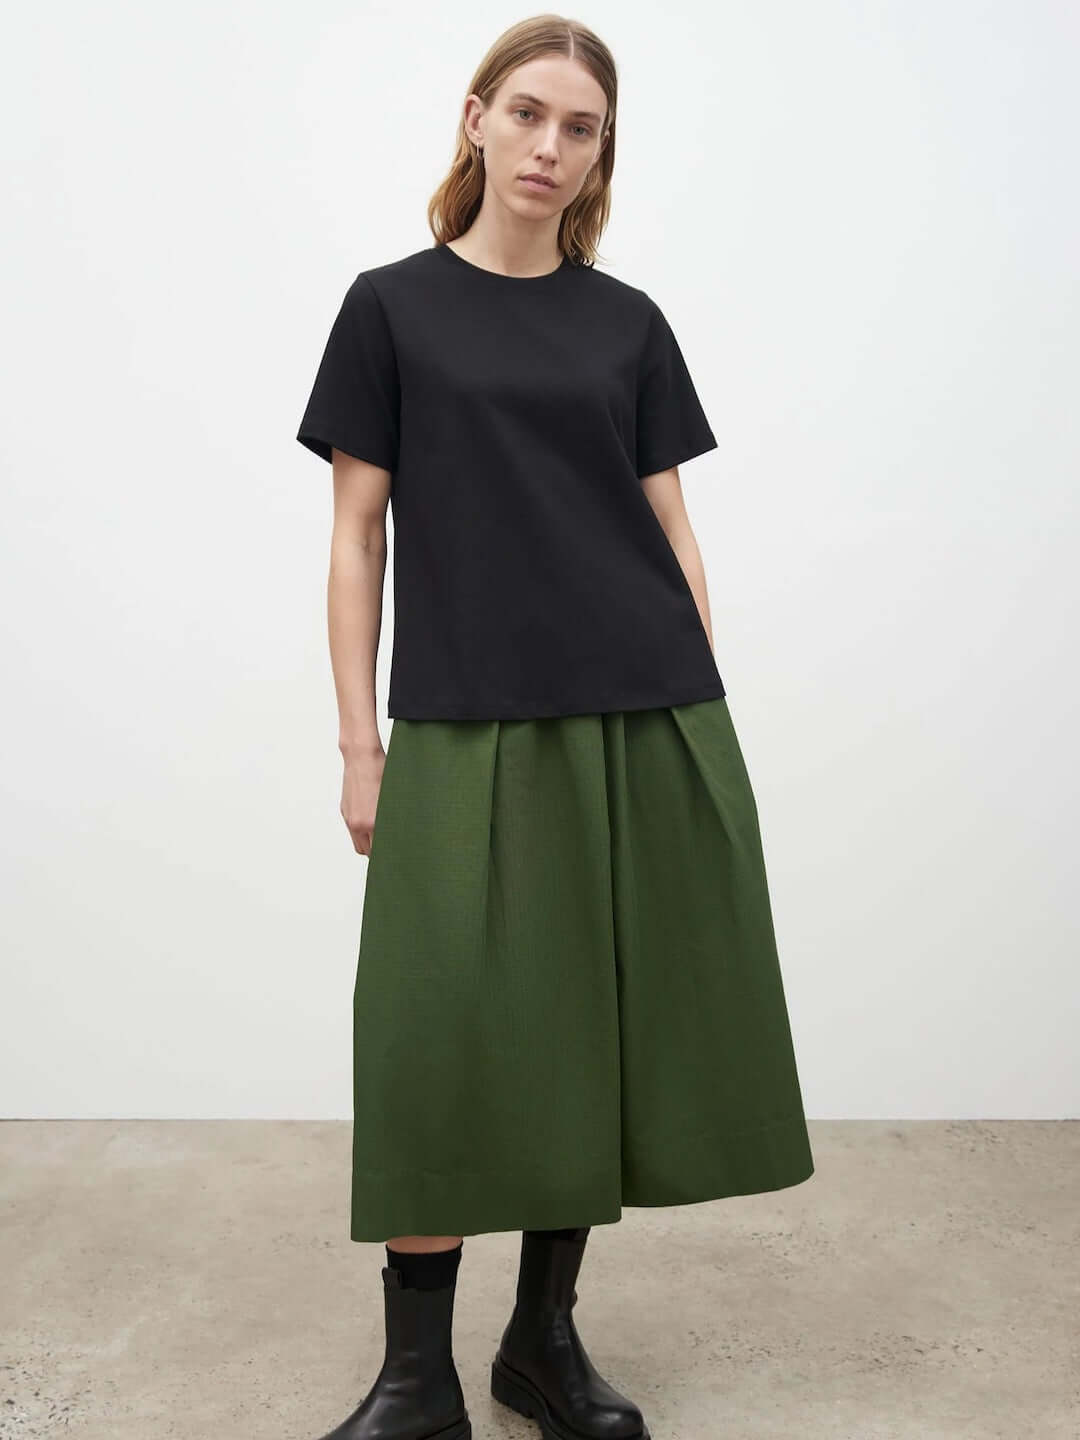 The model is wearing a A-Line Tee – Black by Kowtow and green pleated skirt.